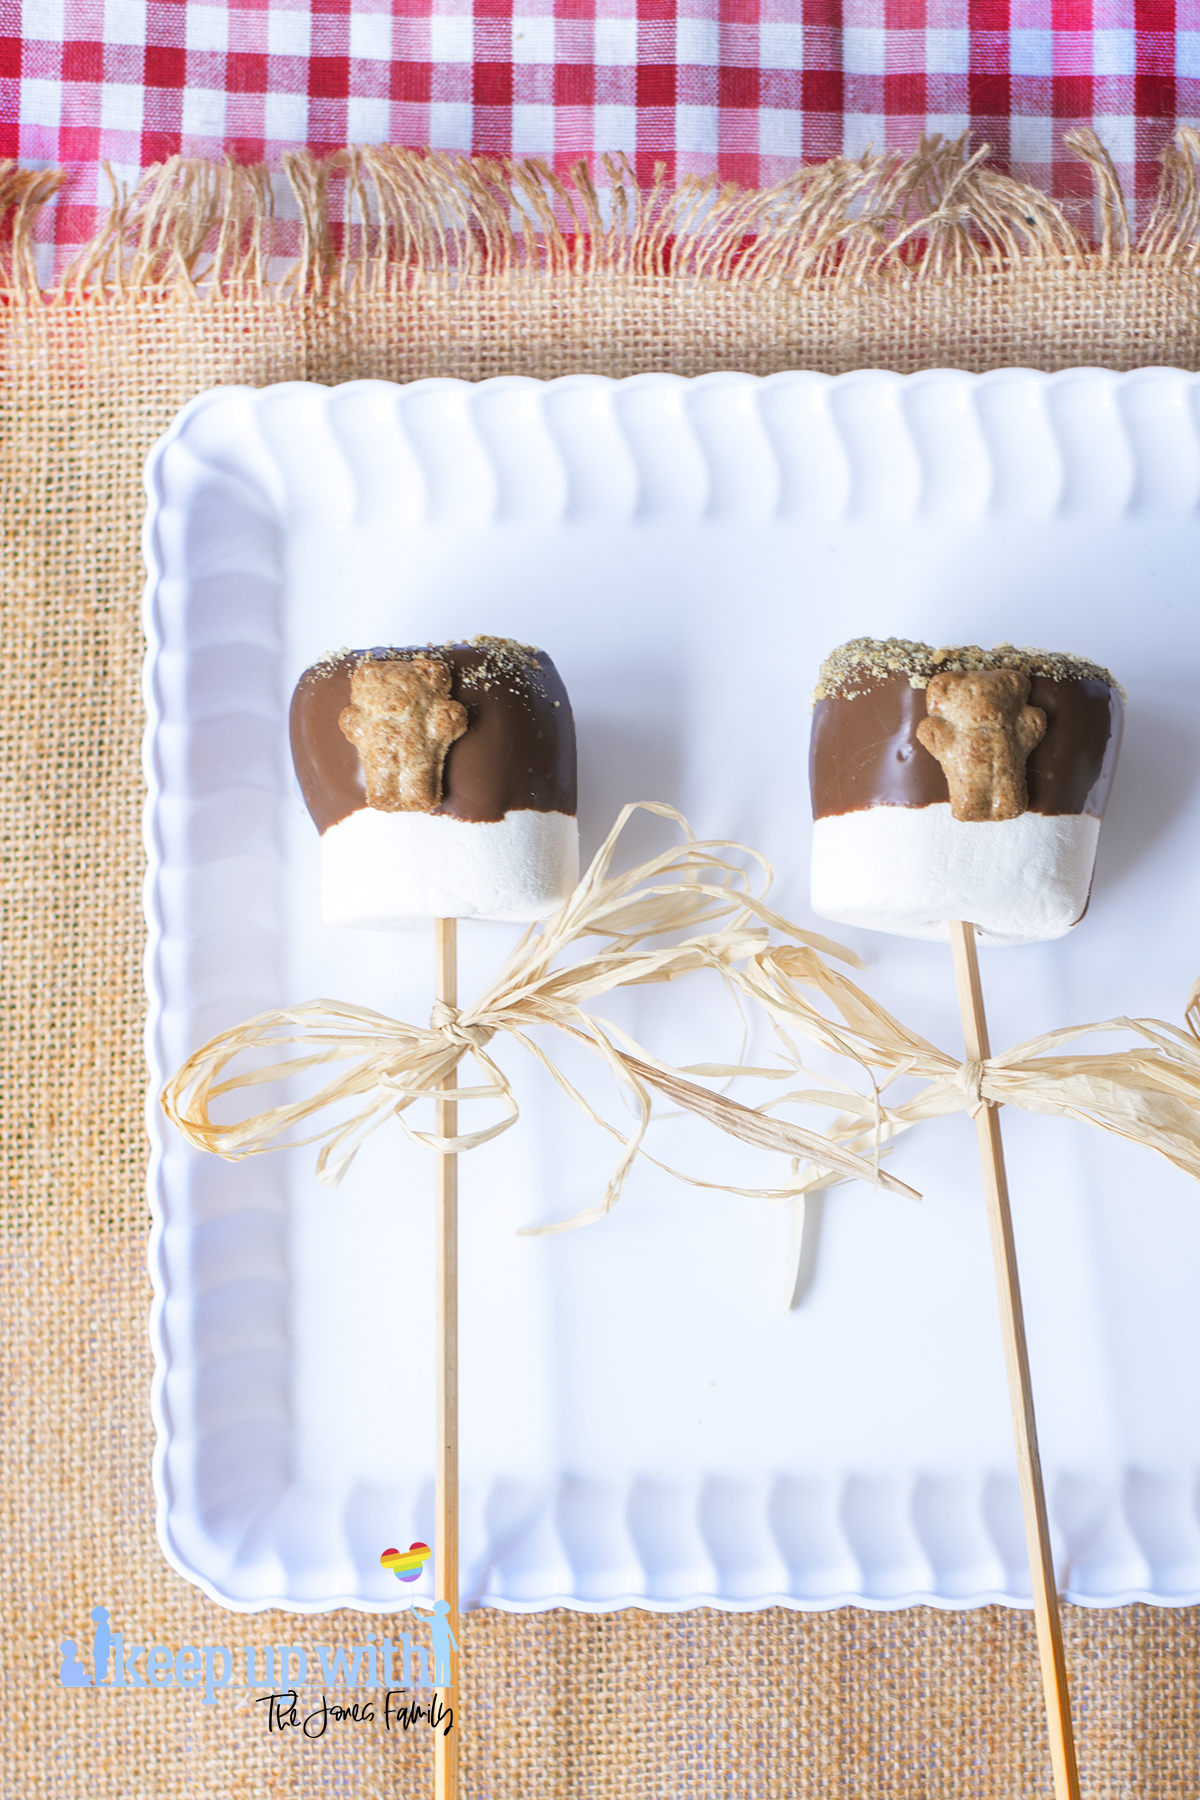 Image shows a white scalloped tray sat on top of a fringed jute tablecloth, which is on top of a red and white checked tablecloth. Inside the tray are two large teddy bear s'mores pops.